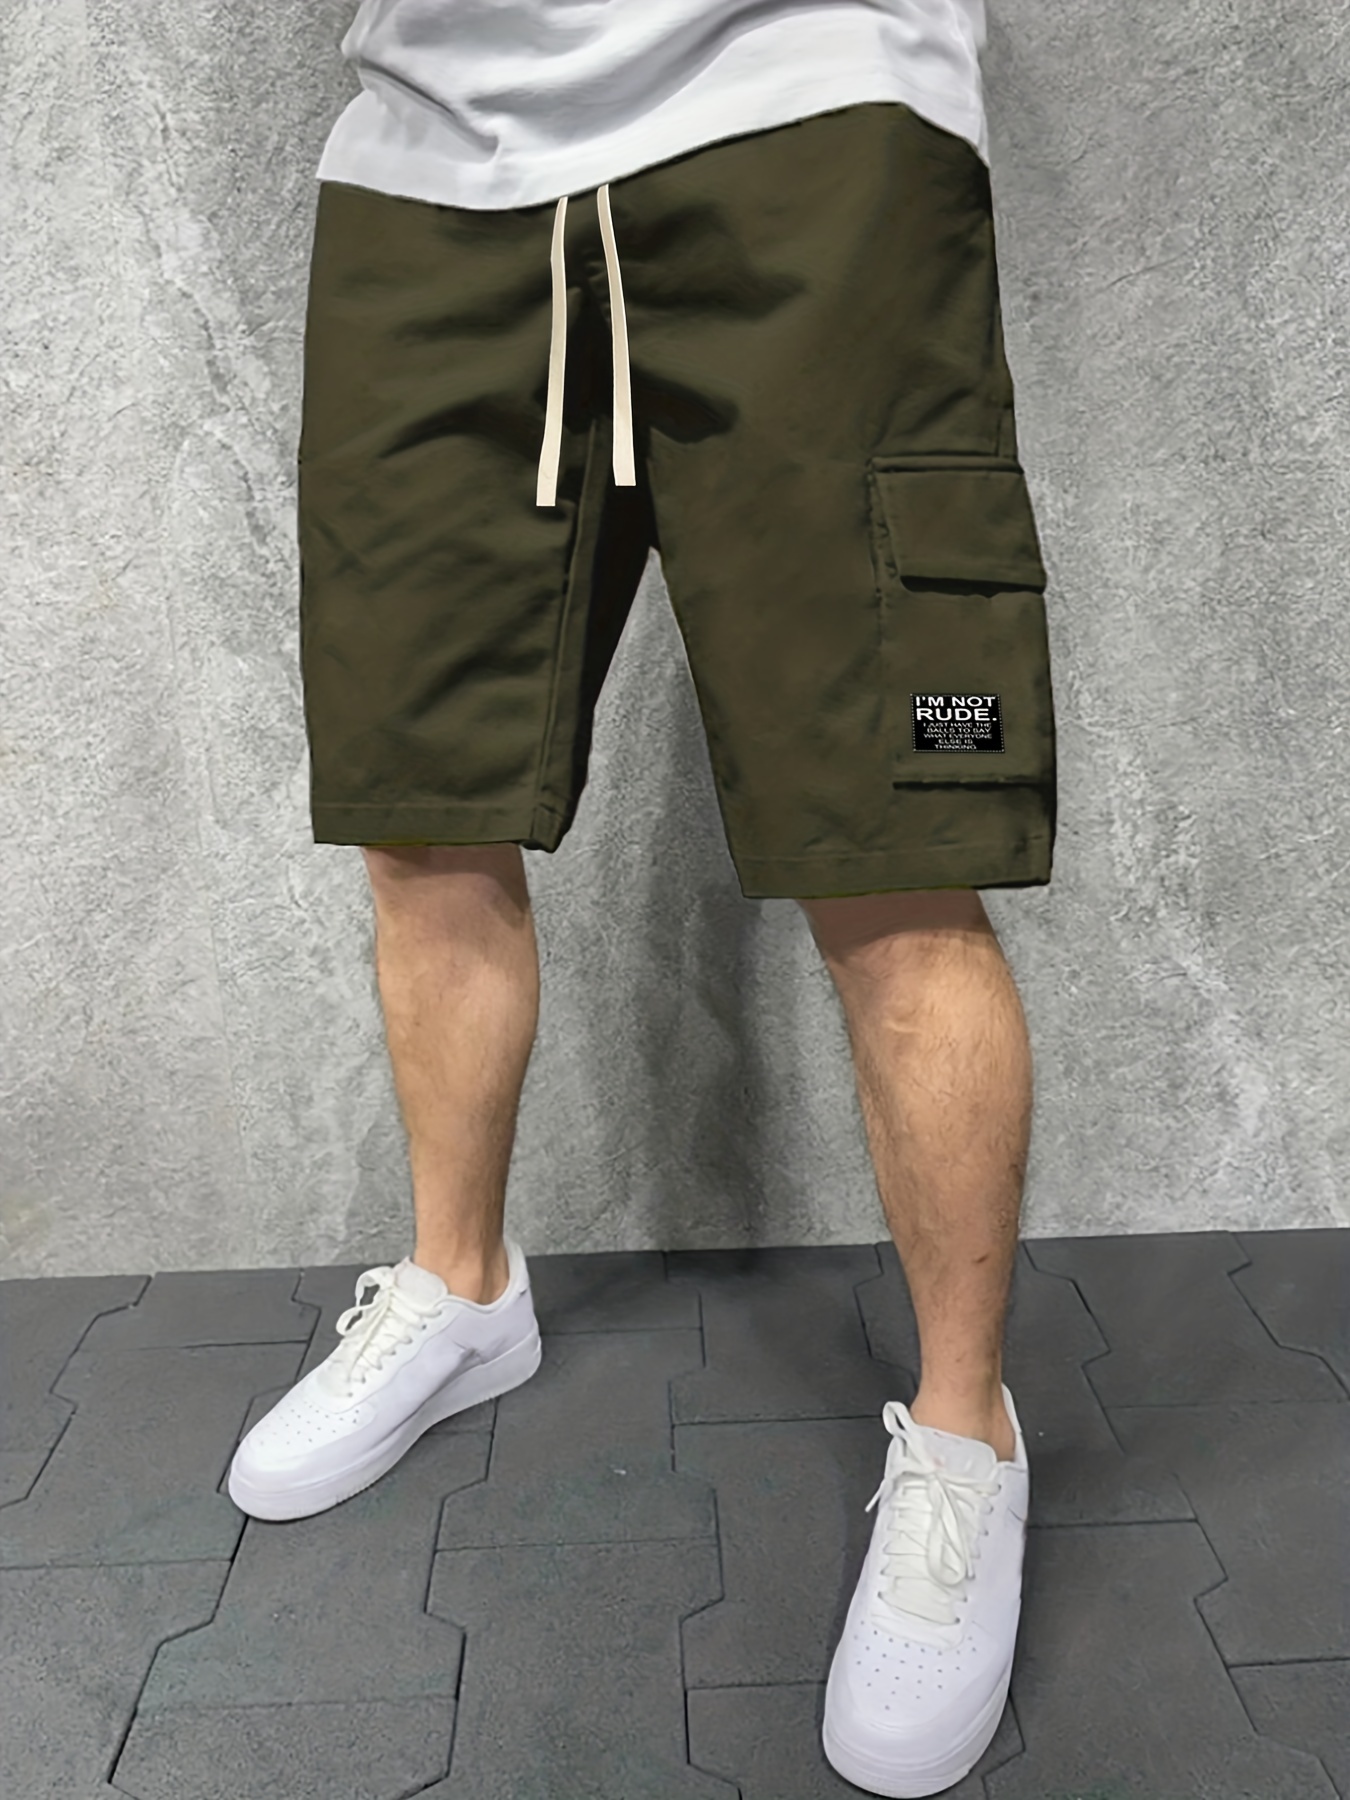 I'm Not Rude, Classic Men's Cargo Shorts With Big Pockets, For